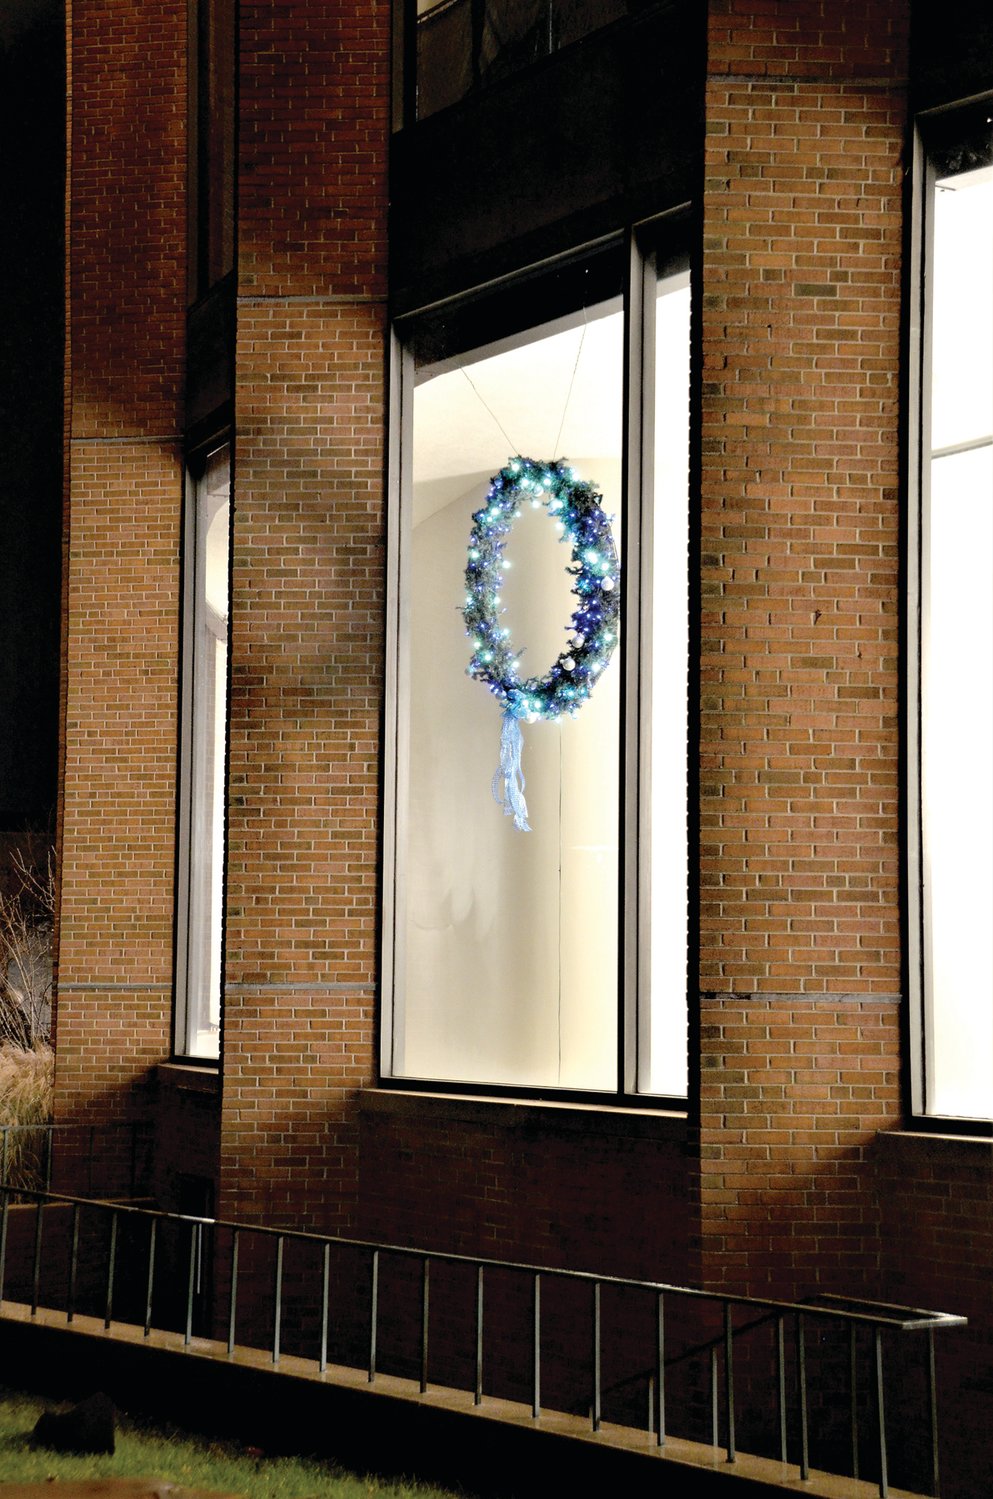 The Blue Light Memorial Wreath hangs in a ground-floor window at the Bucks County Administration Building in Doylestown.